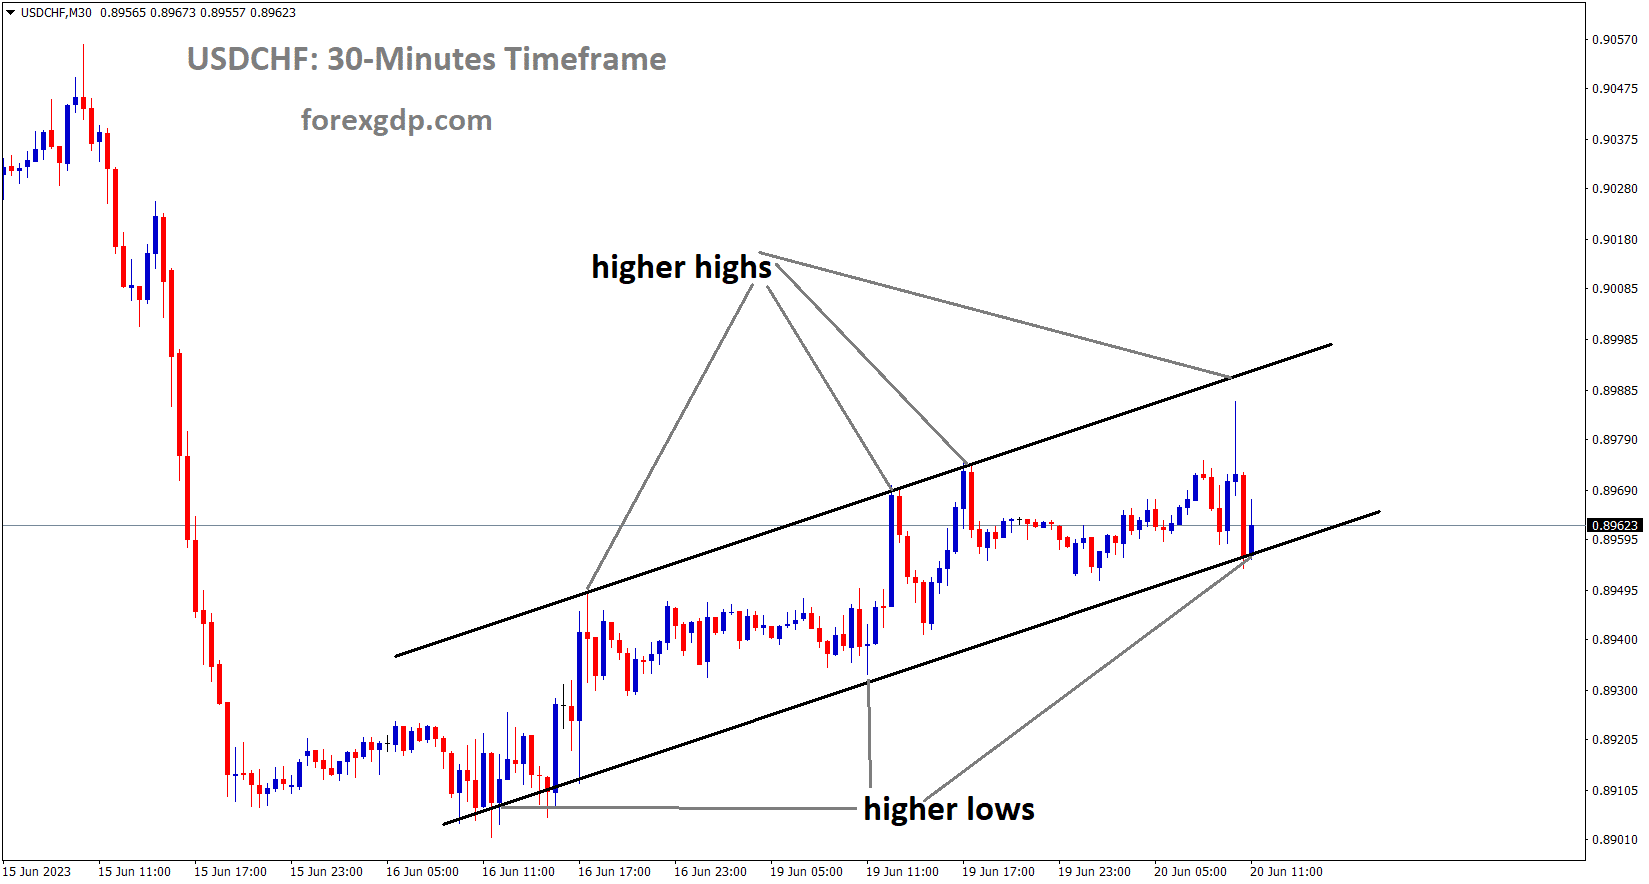 USDCHF is moving in an Ascending channel and the market has reached the higher low area of the channel